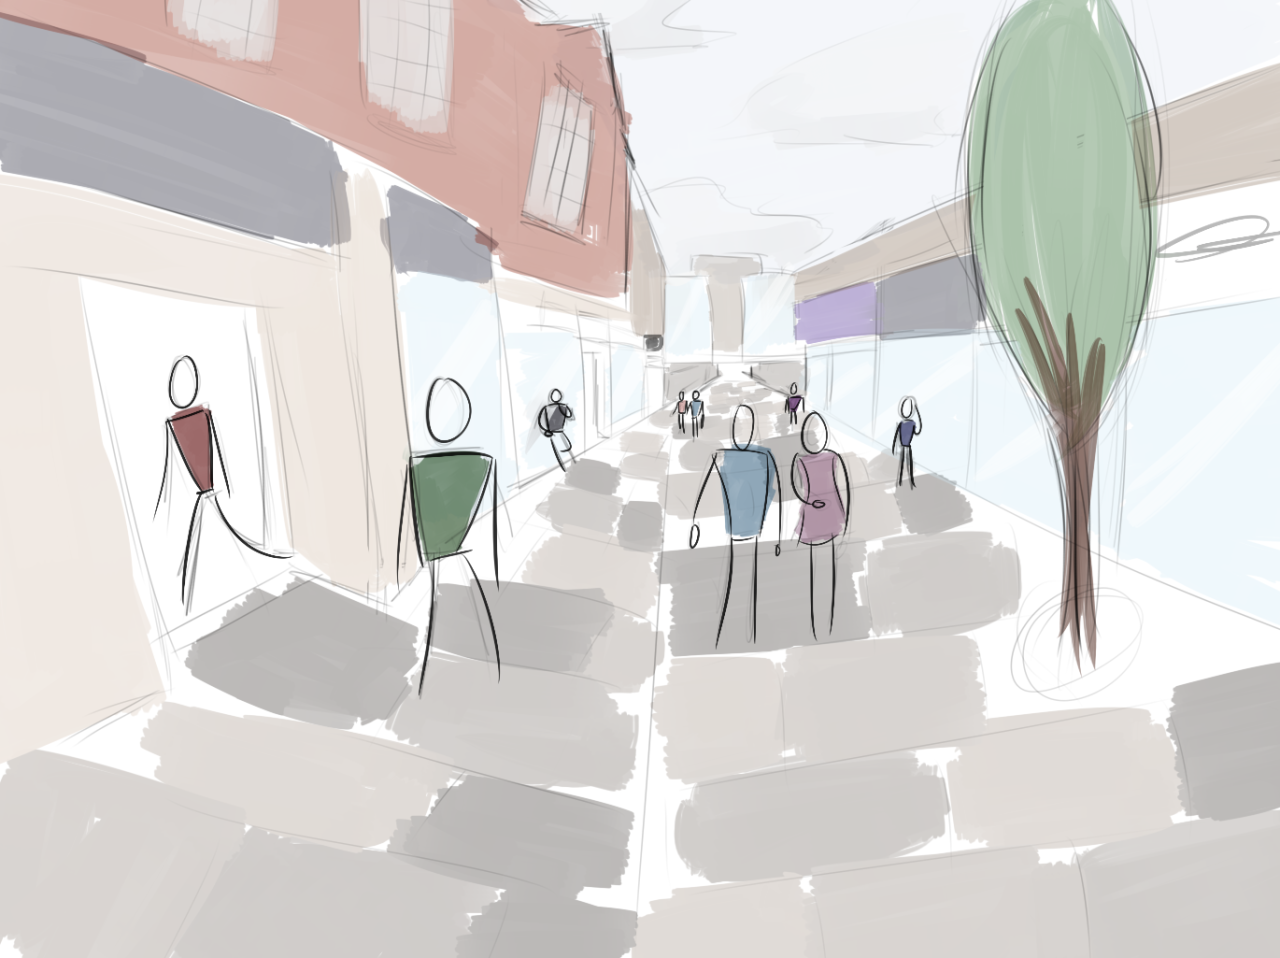 A rough concept artwork for a street in Manchester.